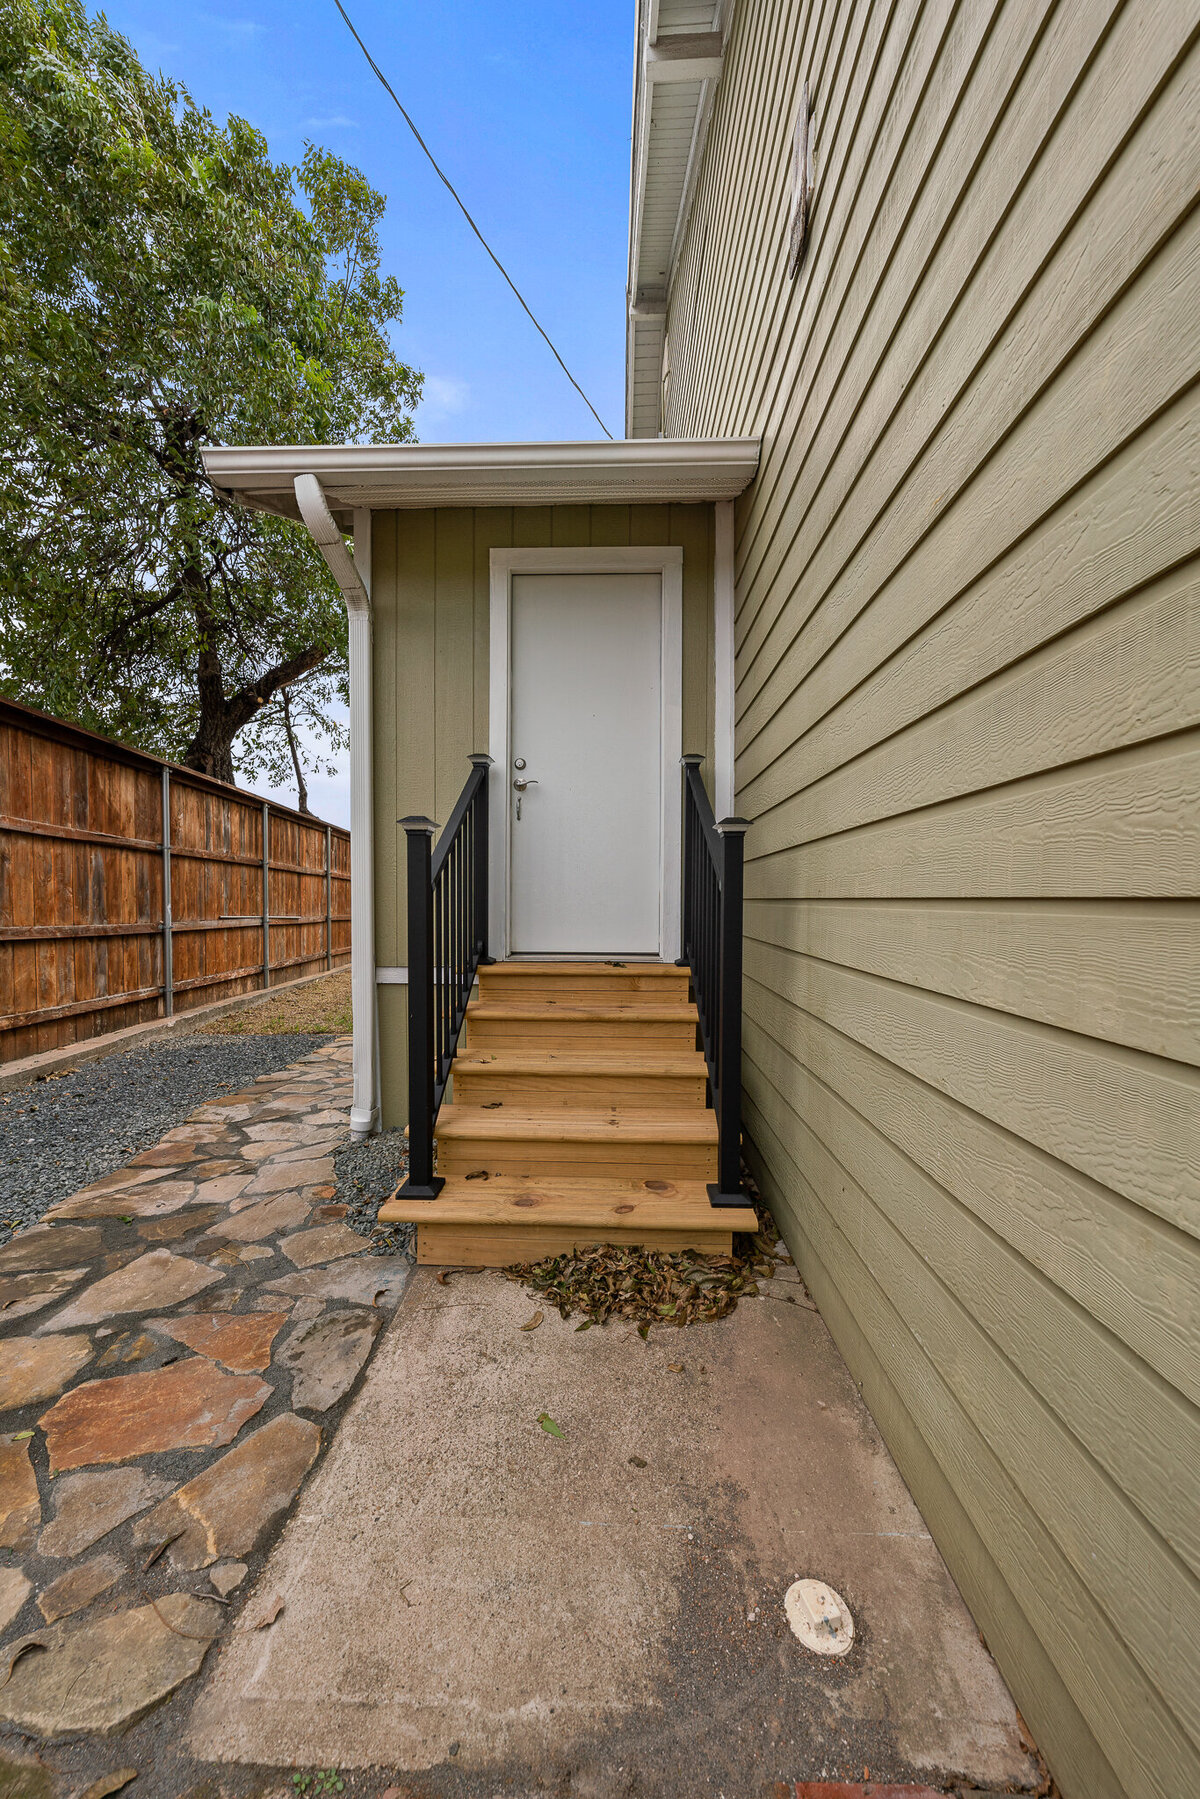 Side entrance of this five-bedroom, 4-bathroom pet-friendly vacation rental house for 12 guests with free wifi, free parking, hot tub, mother-in-law suite, King beds and updated kitchen in downtown Waco, TX.